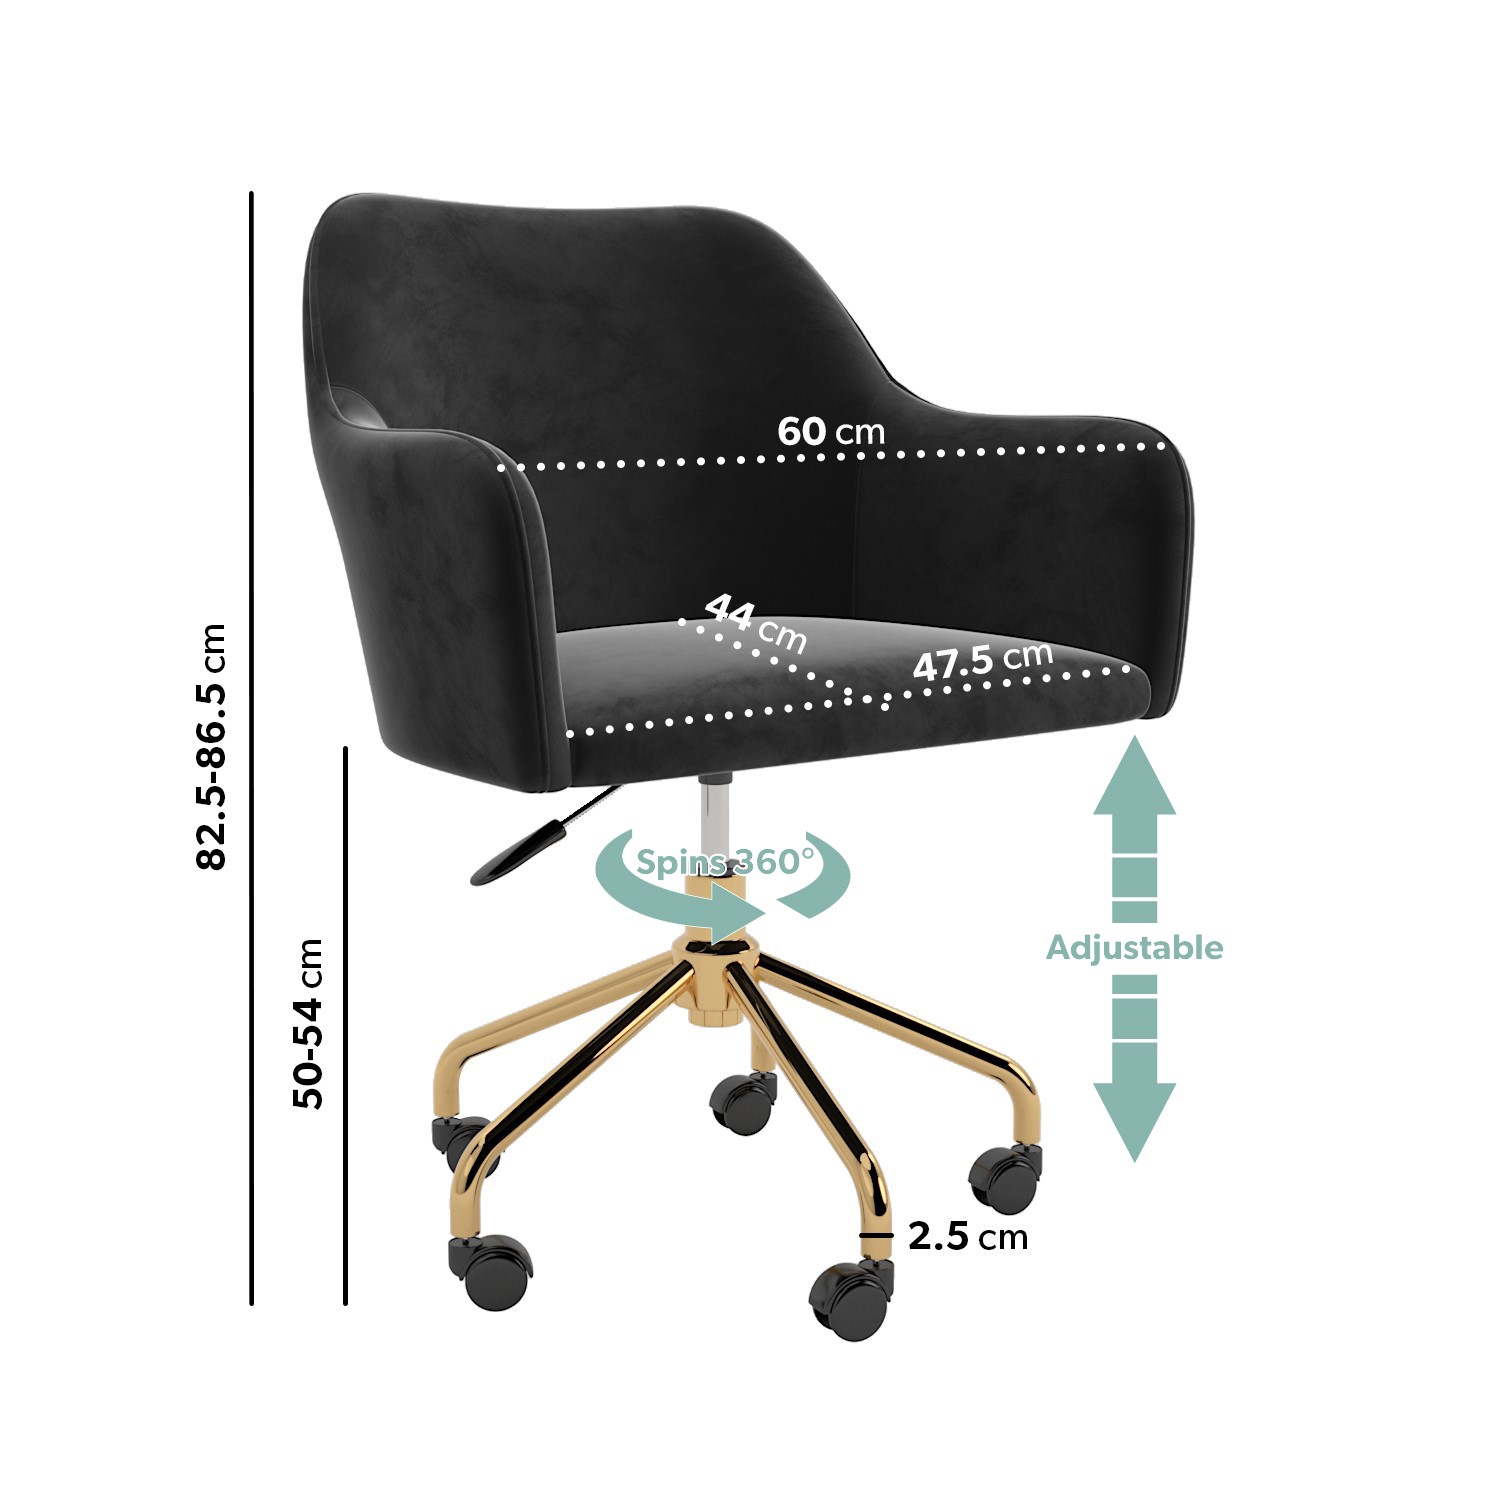 Read more about Black velvet office chair with arms marley